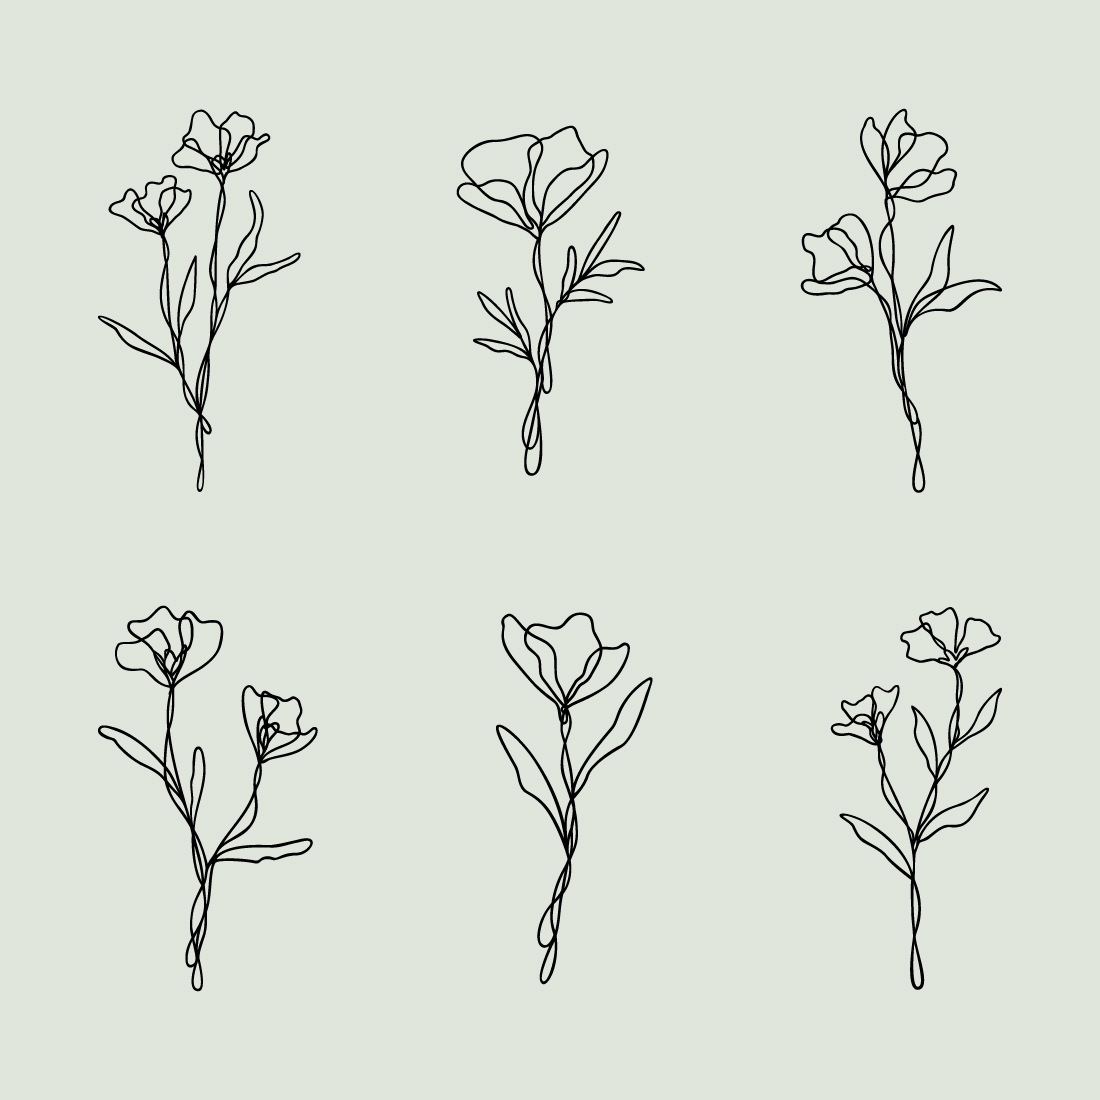 Flower Sketch Collection with Line Art Style